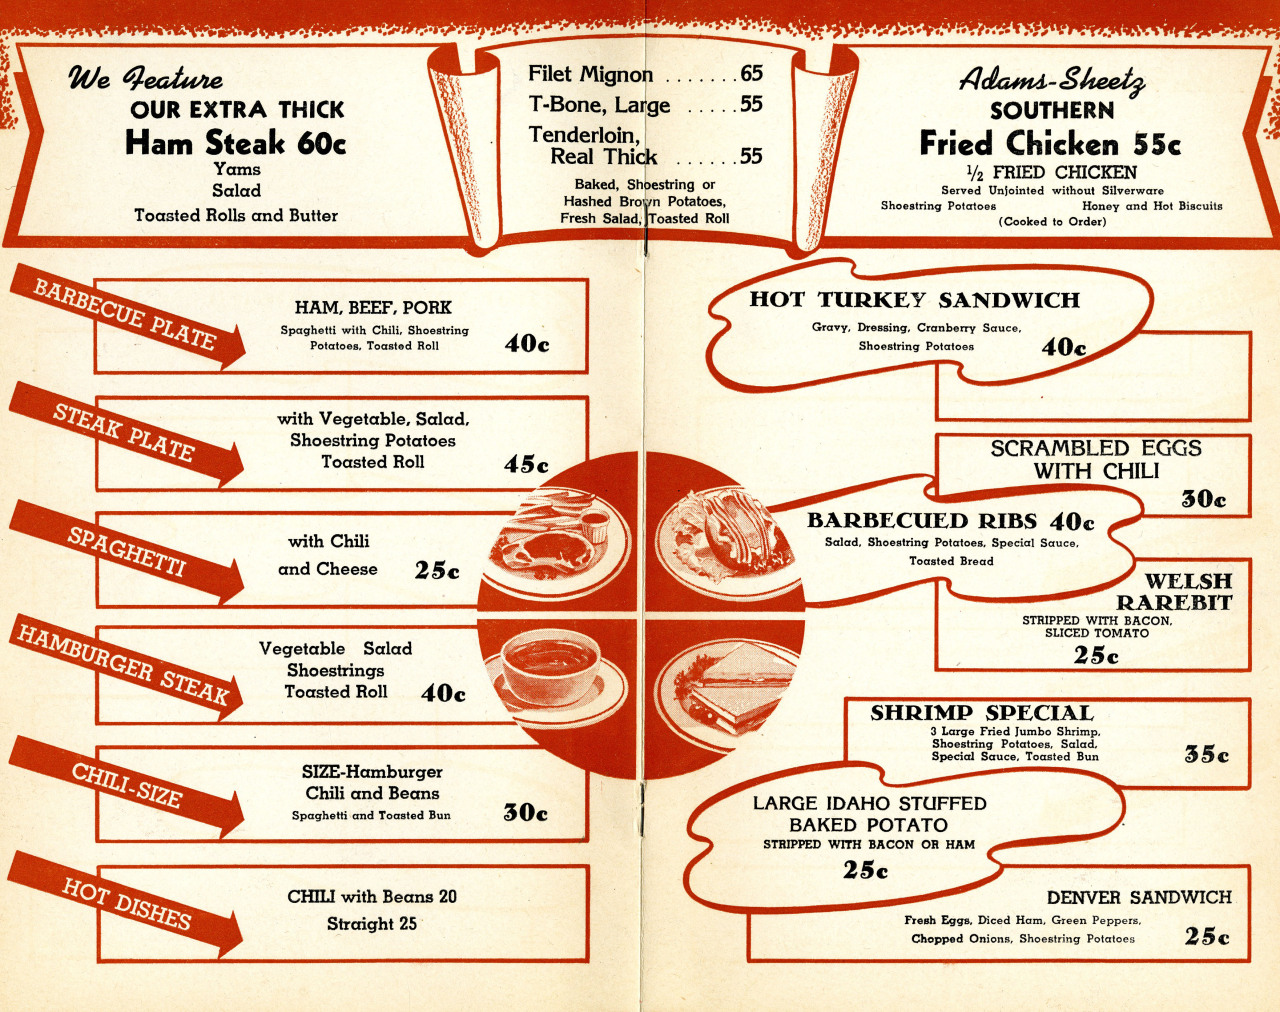 No wonder the Adams-Sheetz “drive-in” restaurants were called “Drive Inns” in the 1940s. With offerings like these (from a location on 8th & Maple downtown), a nap before driving-out was probably in order. The great mobile promise of L.A. automotive...